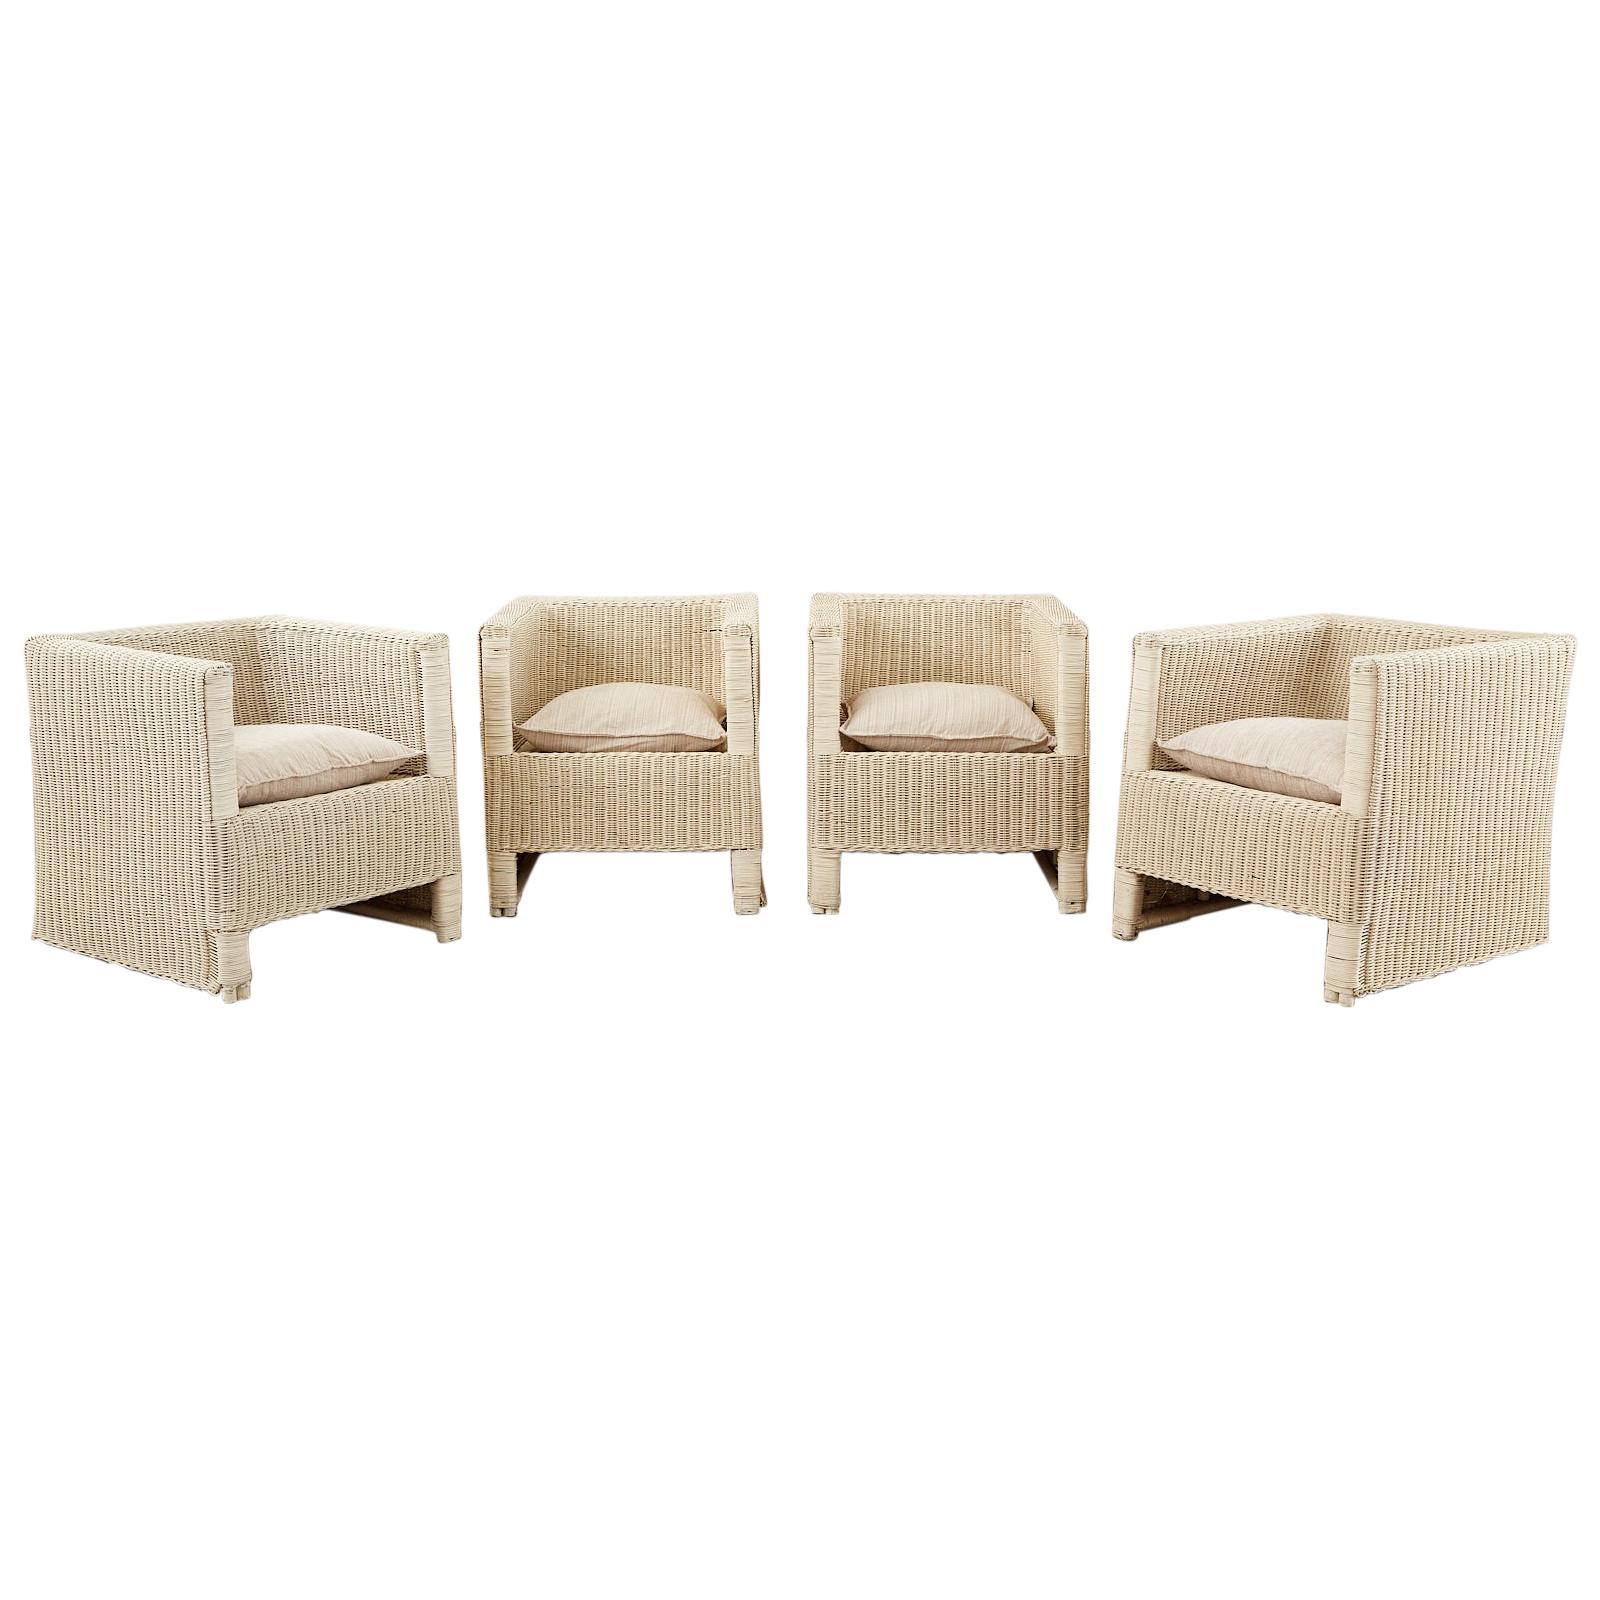 Set of Four Midcentury Painted Wicker Rattan Cube Chairs For Sale